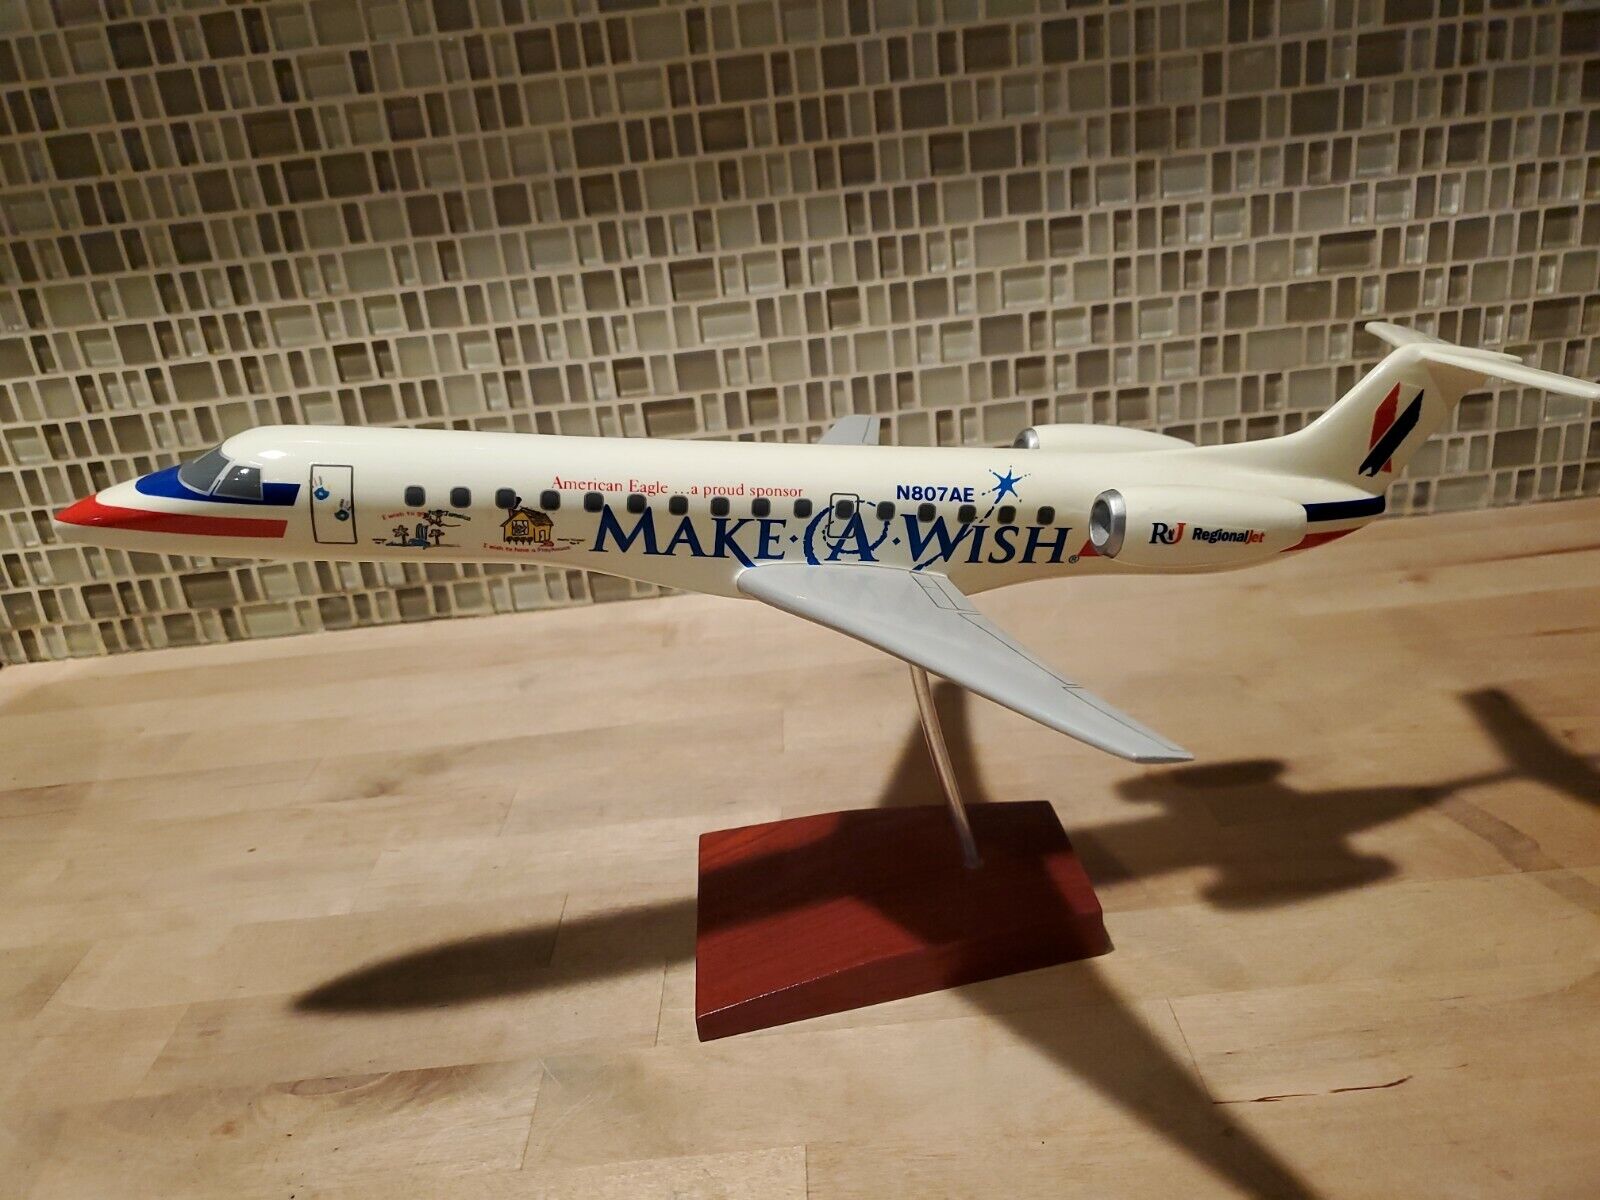 PACMIN? American Airlines Make A Wish Regional Jet Embraer Airplane Model - RARE